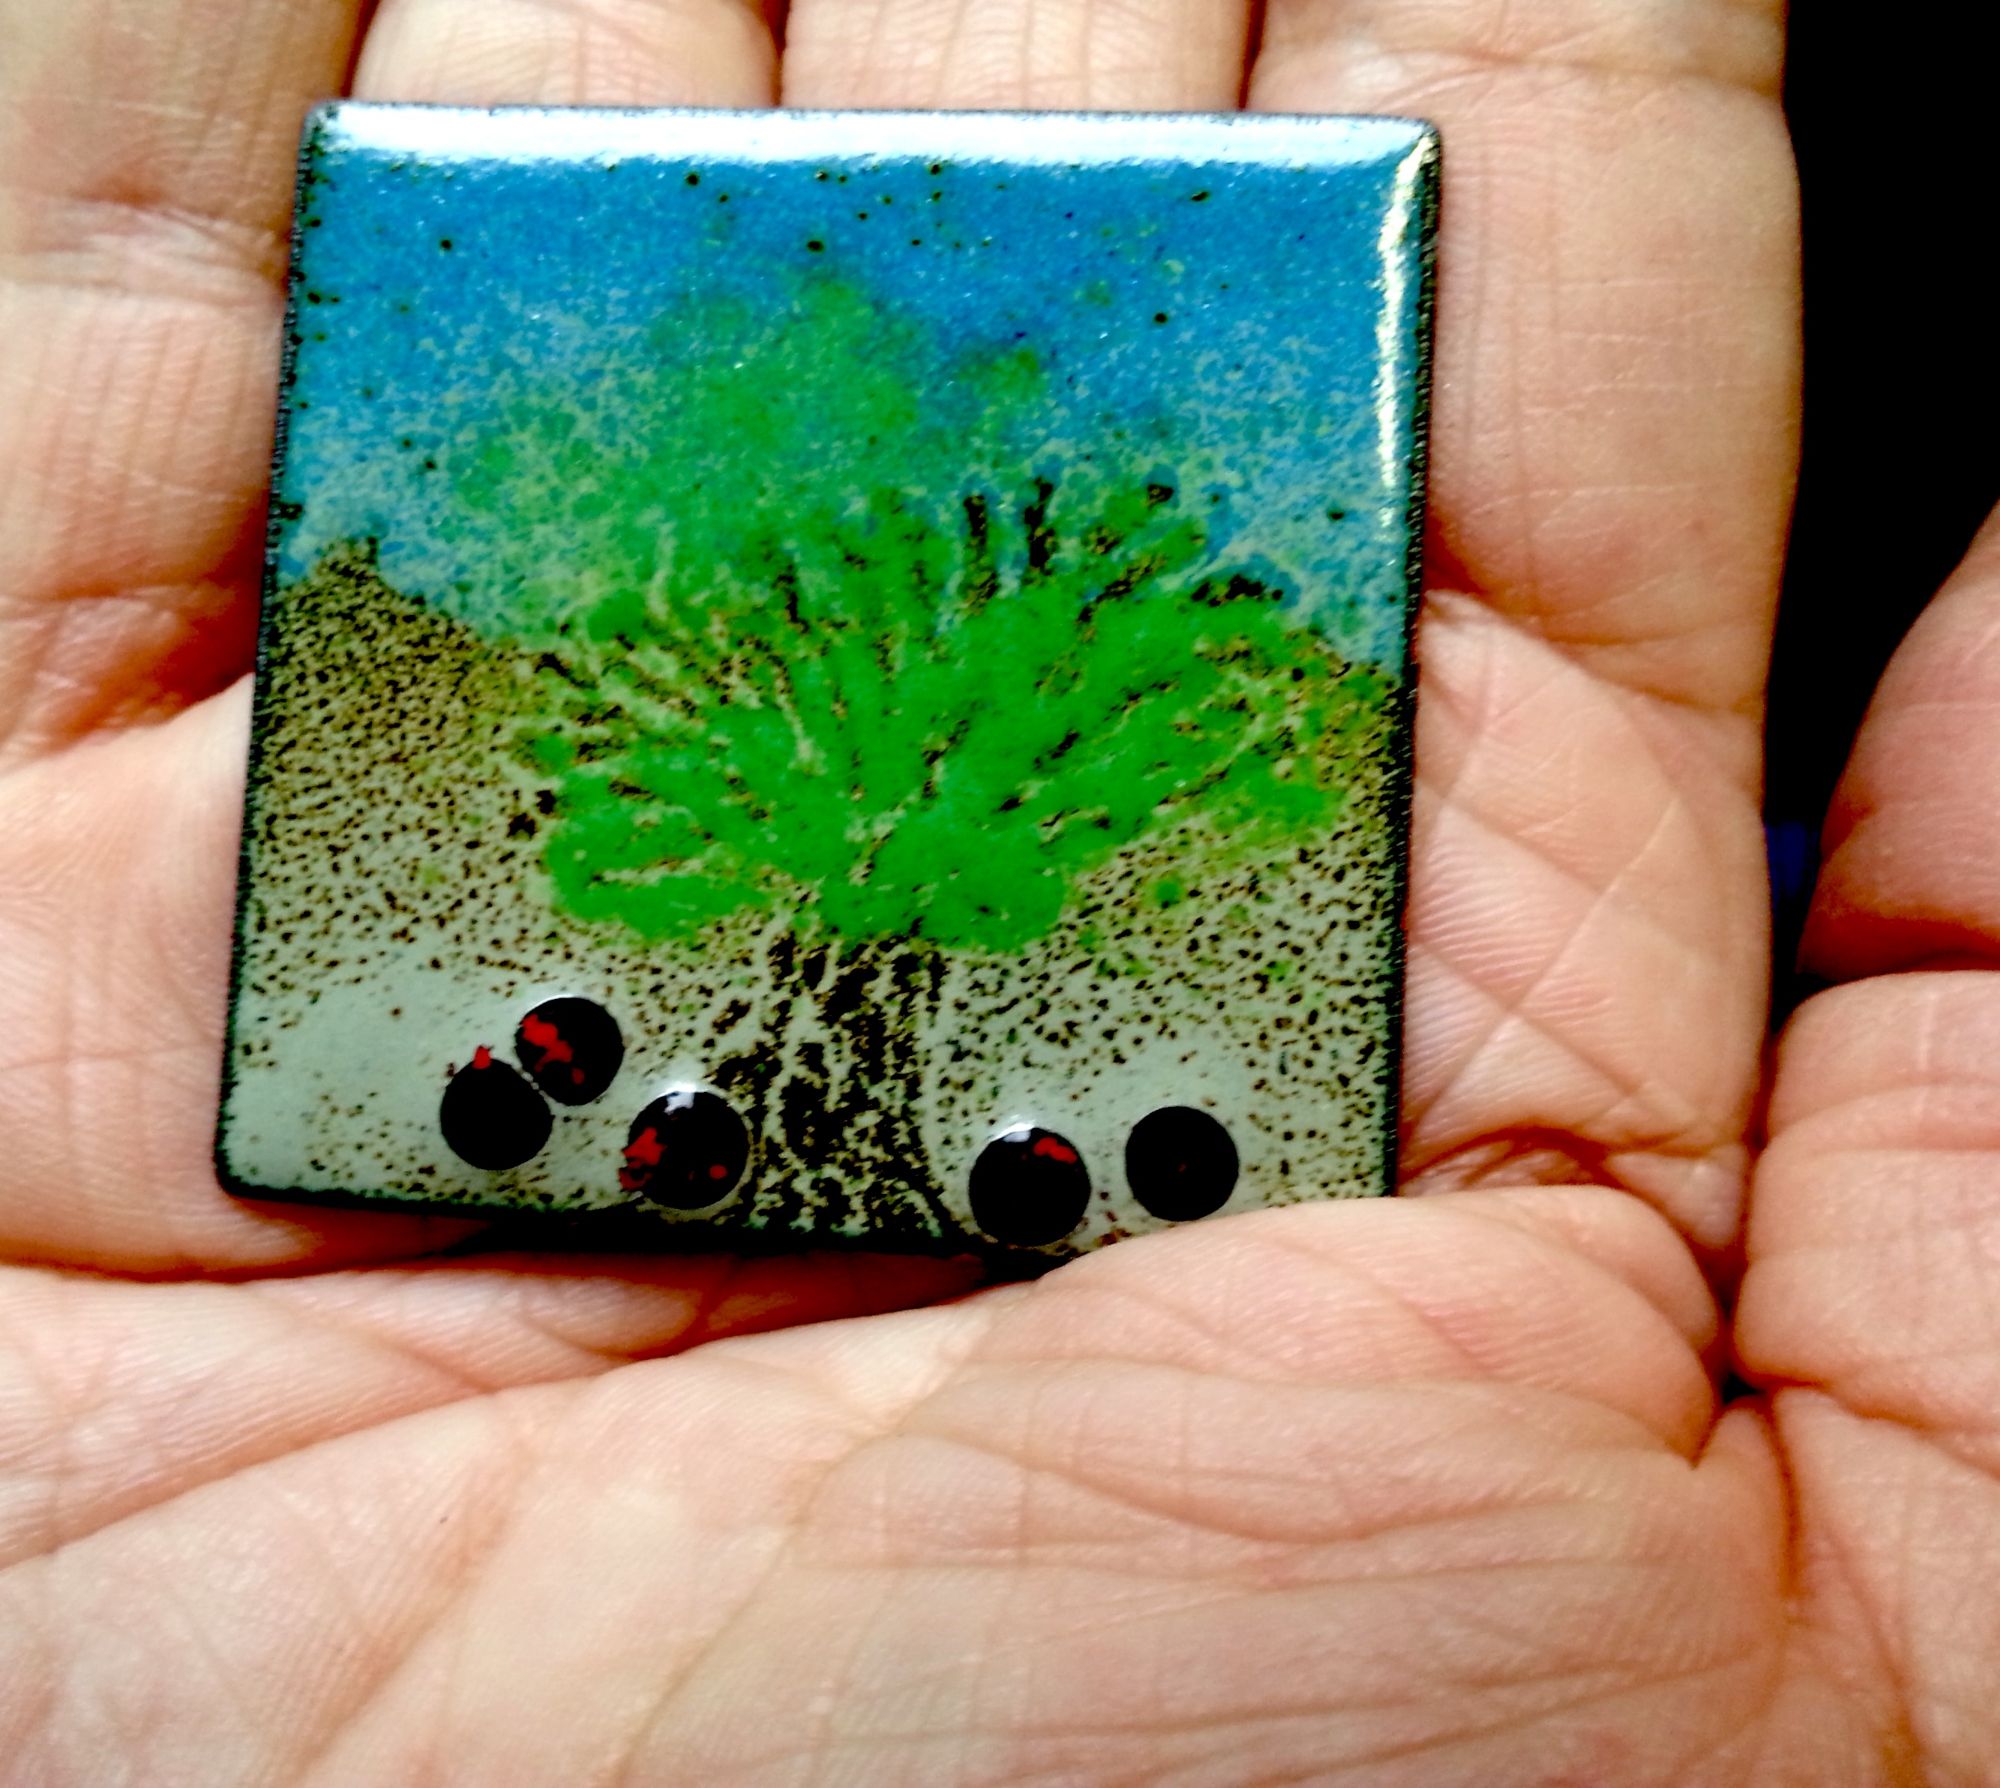 Student's Enamel Plaque made at Enamellin Session